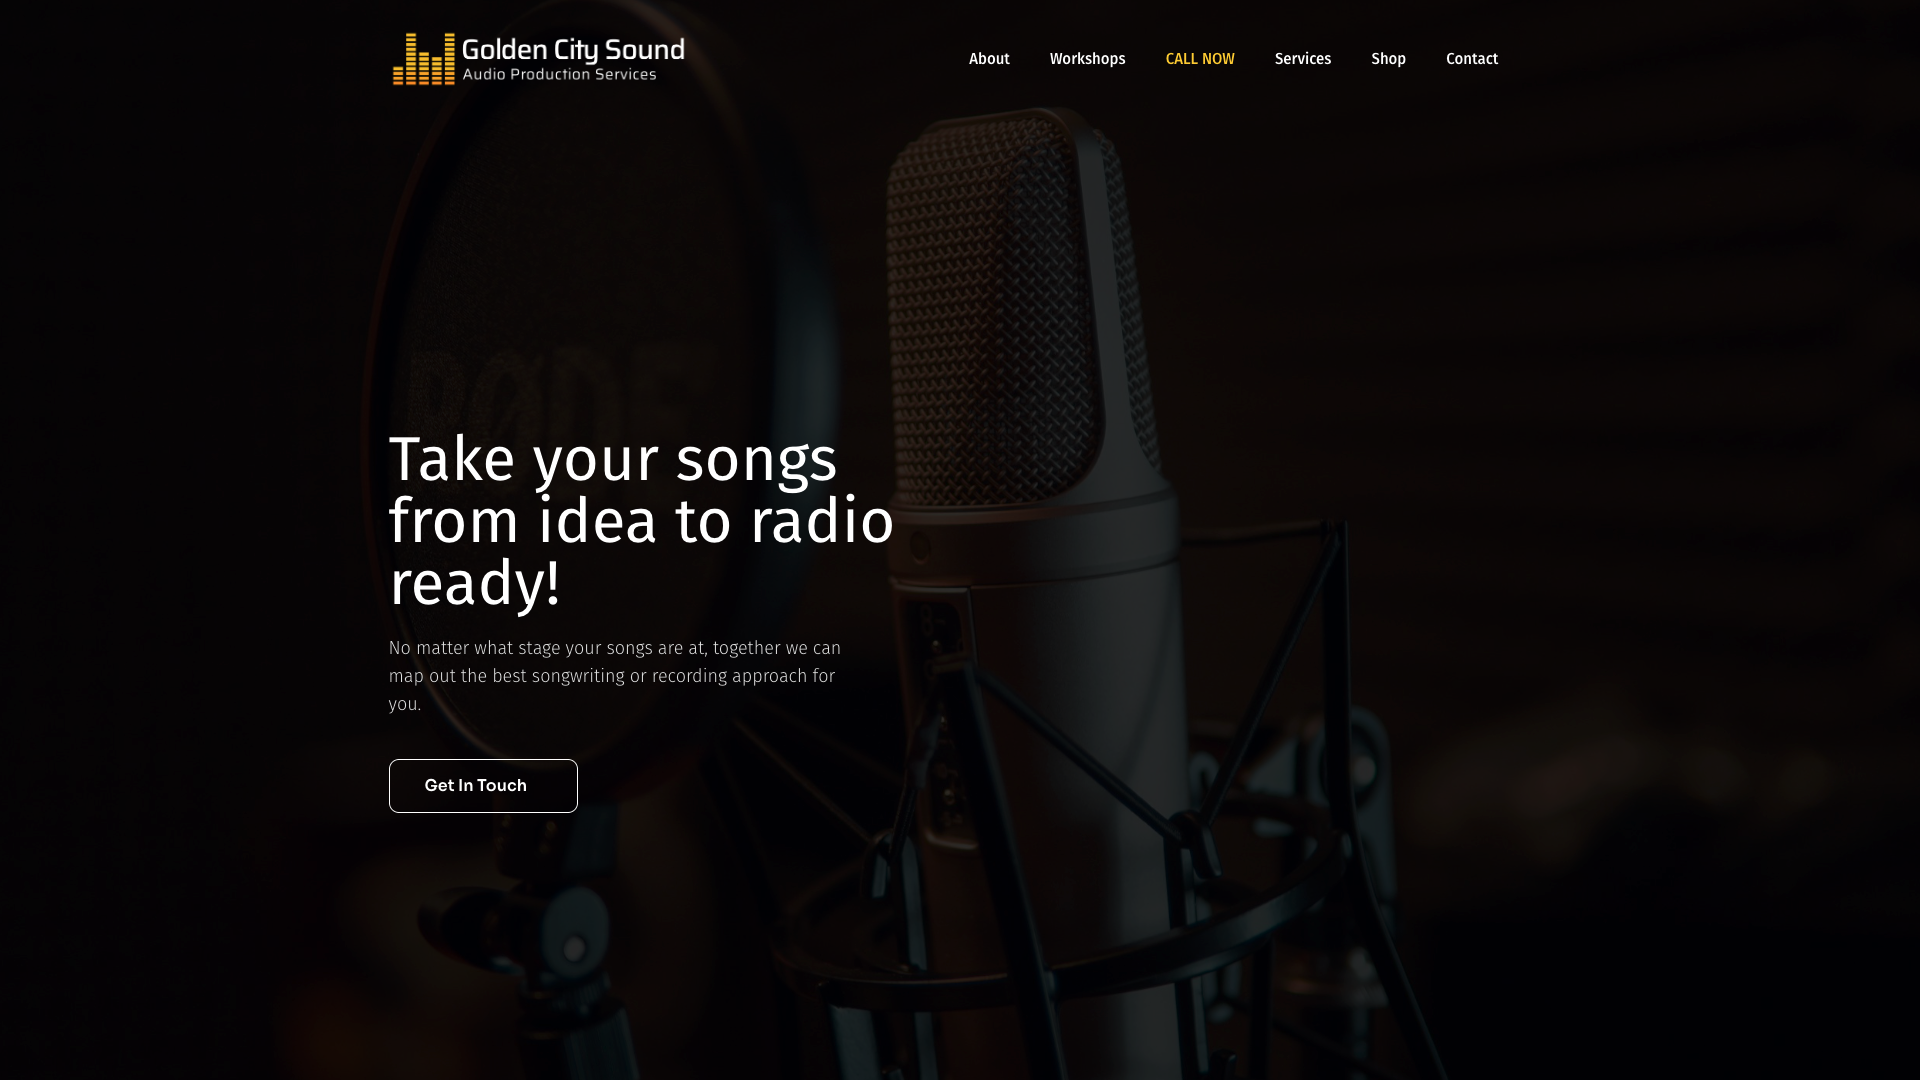 Before and after comparison - Recording studio home page